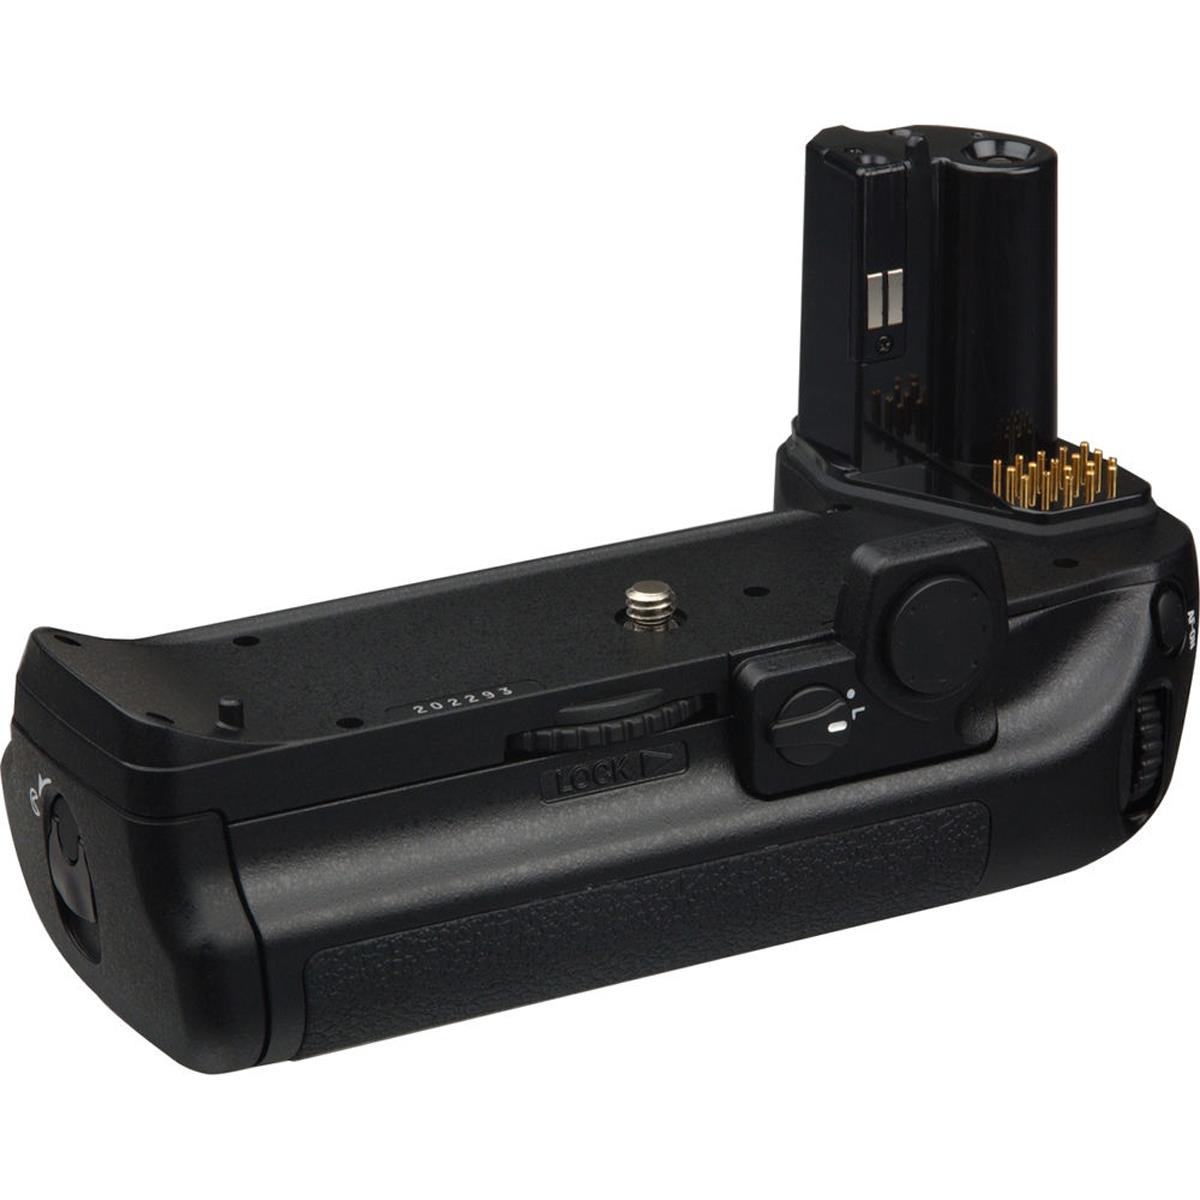 Image of Nikon MB-40 Multi-Power Battery Pack for F6 Auto Focus Camera